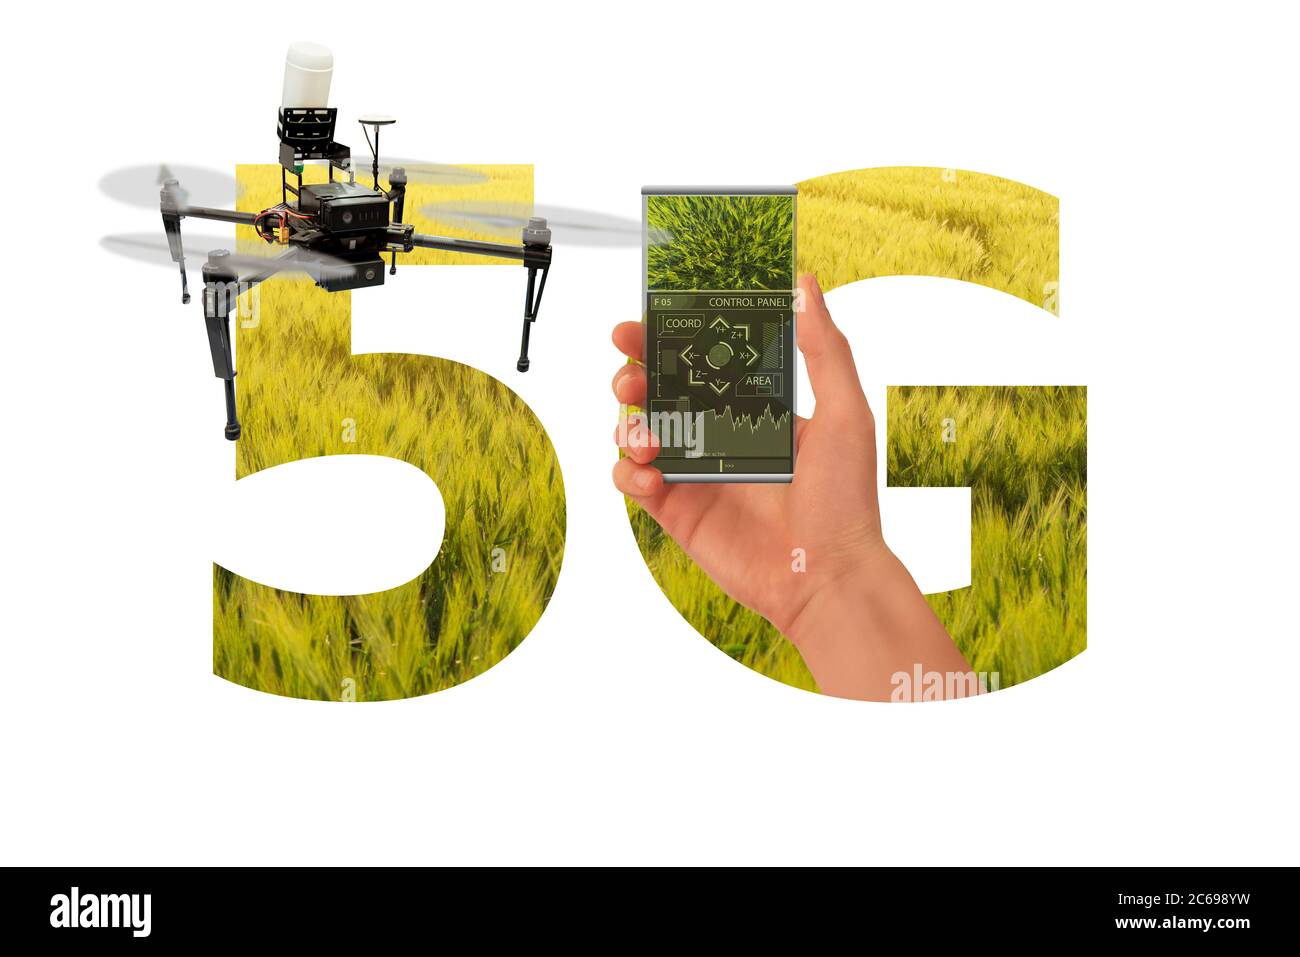 5G network for control drone on a smart farm. Stock Photo